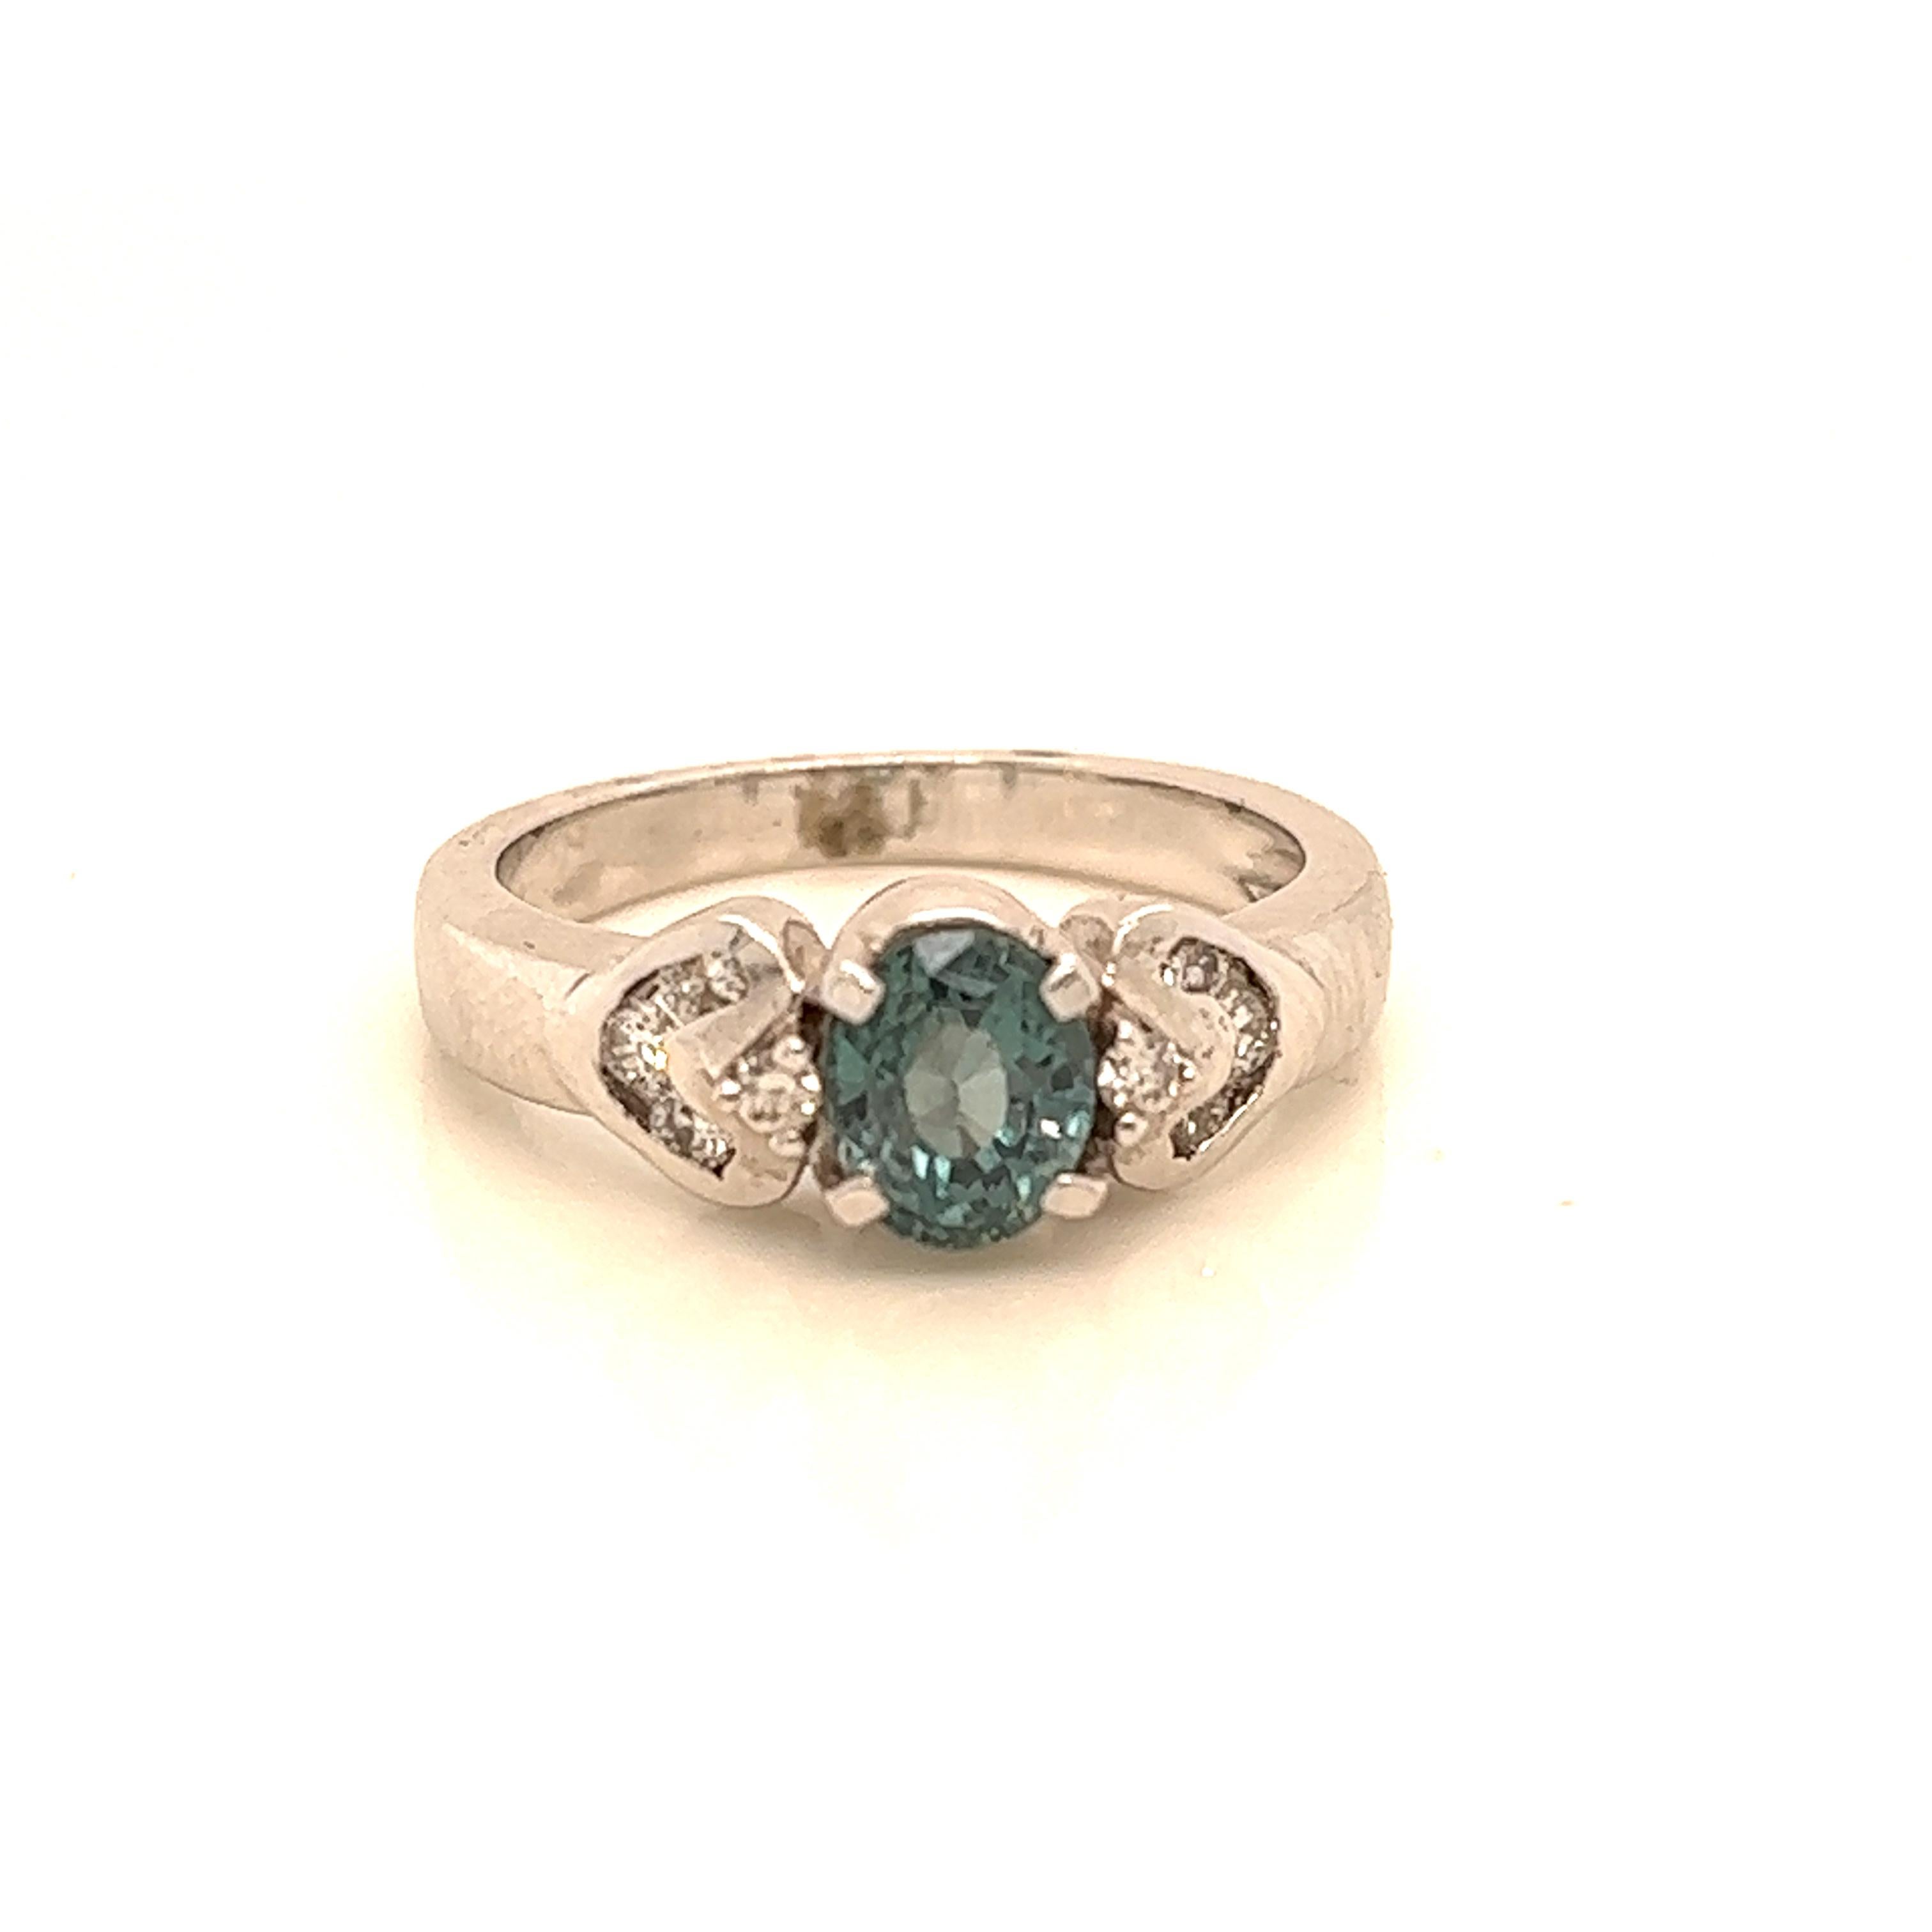 This is a gorgeous natural AAA quality oval  Alexandrite surrounded by dainty diamonds that is set in a vintage white gold setting. This ring features a natural 1.26 carat oval alexandrite that is certified by the Gemological Institute of America